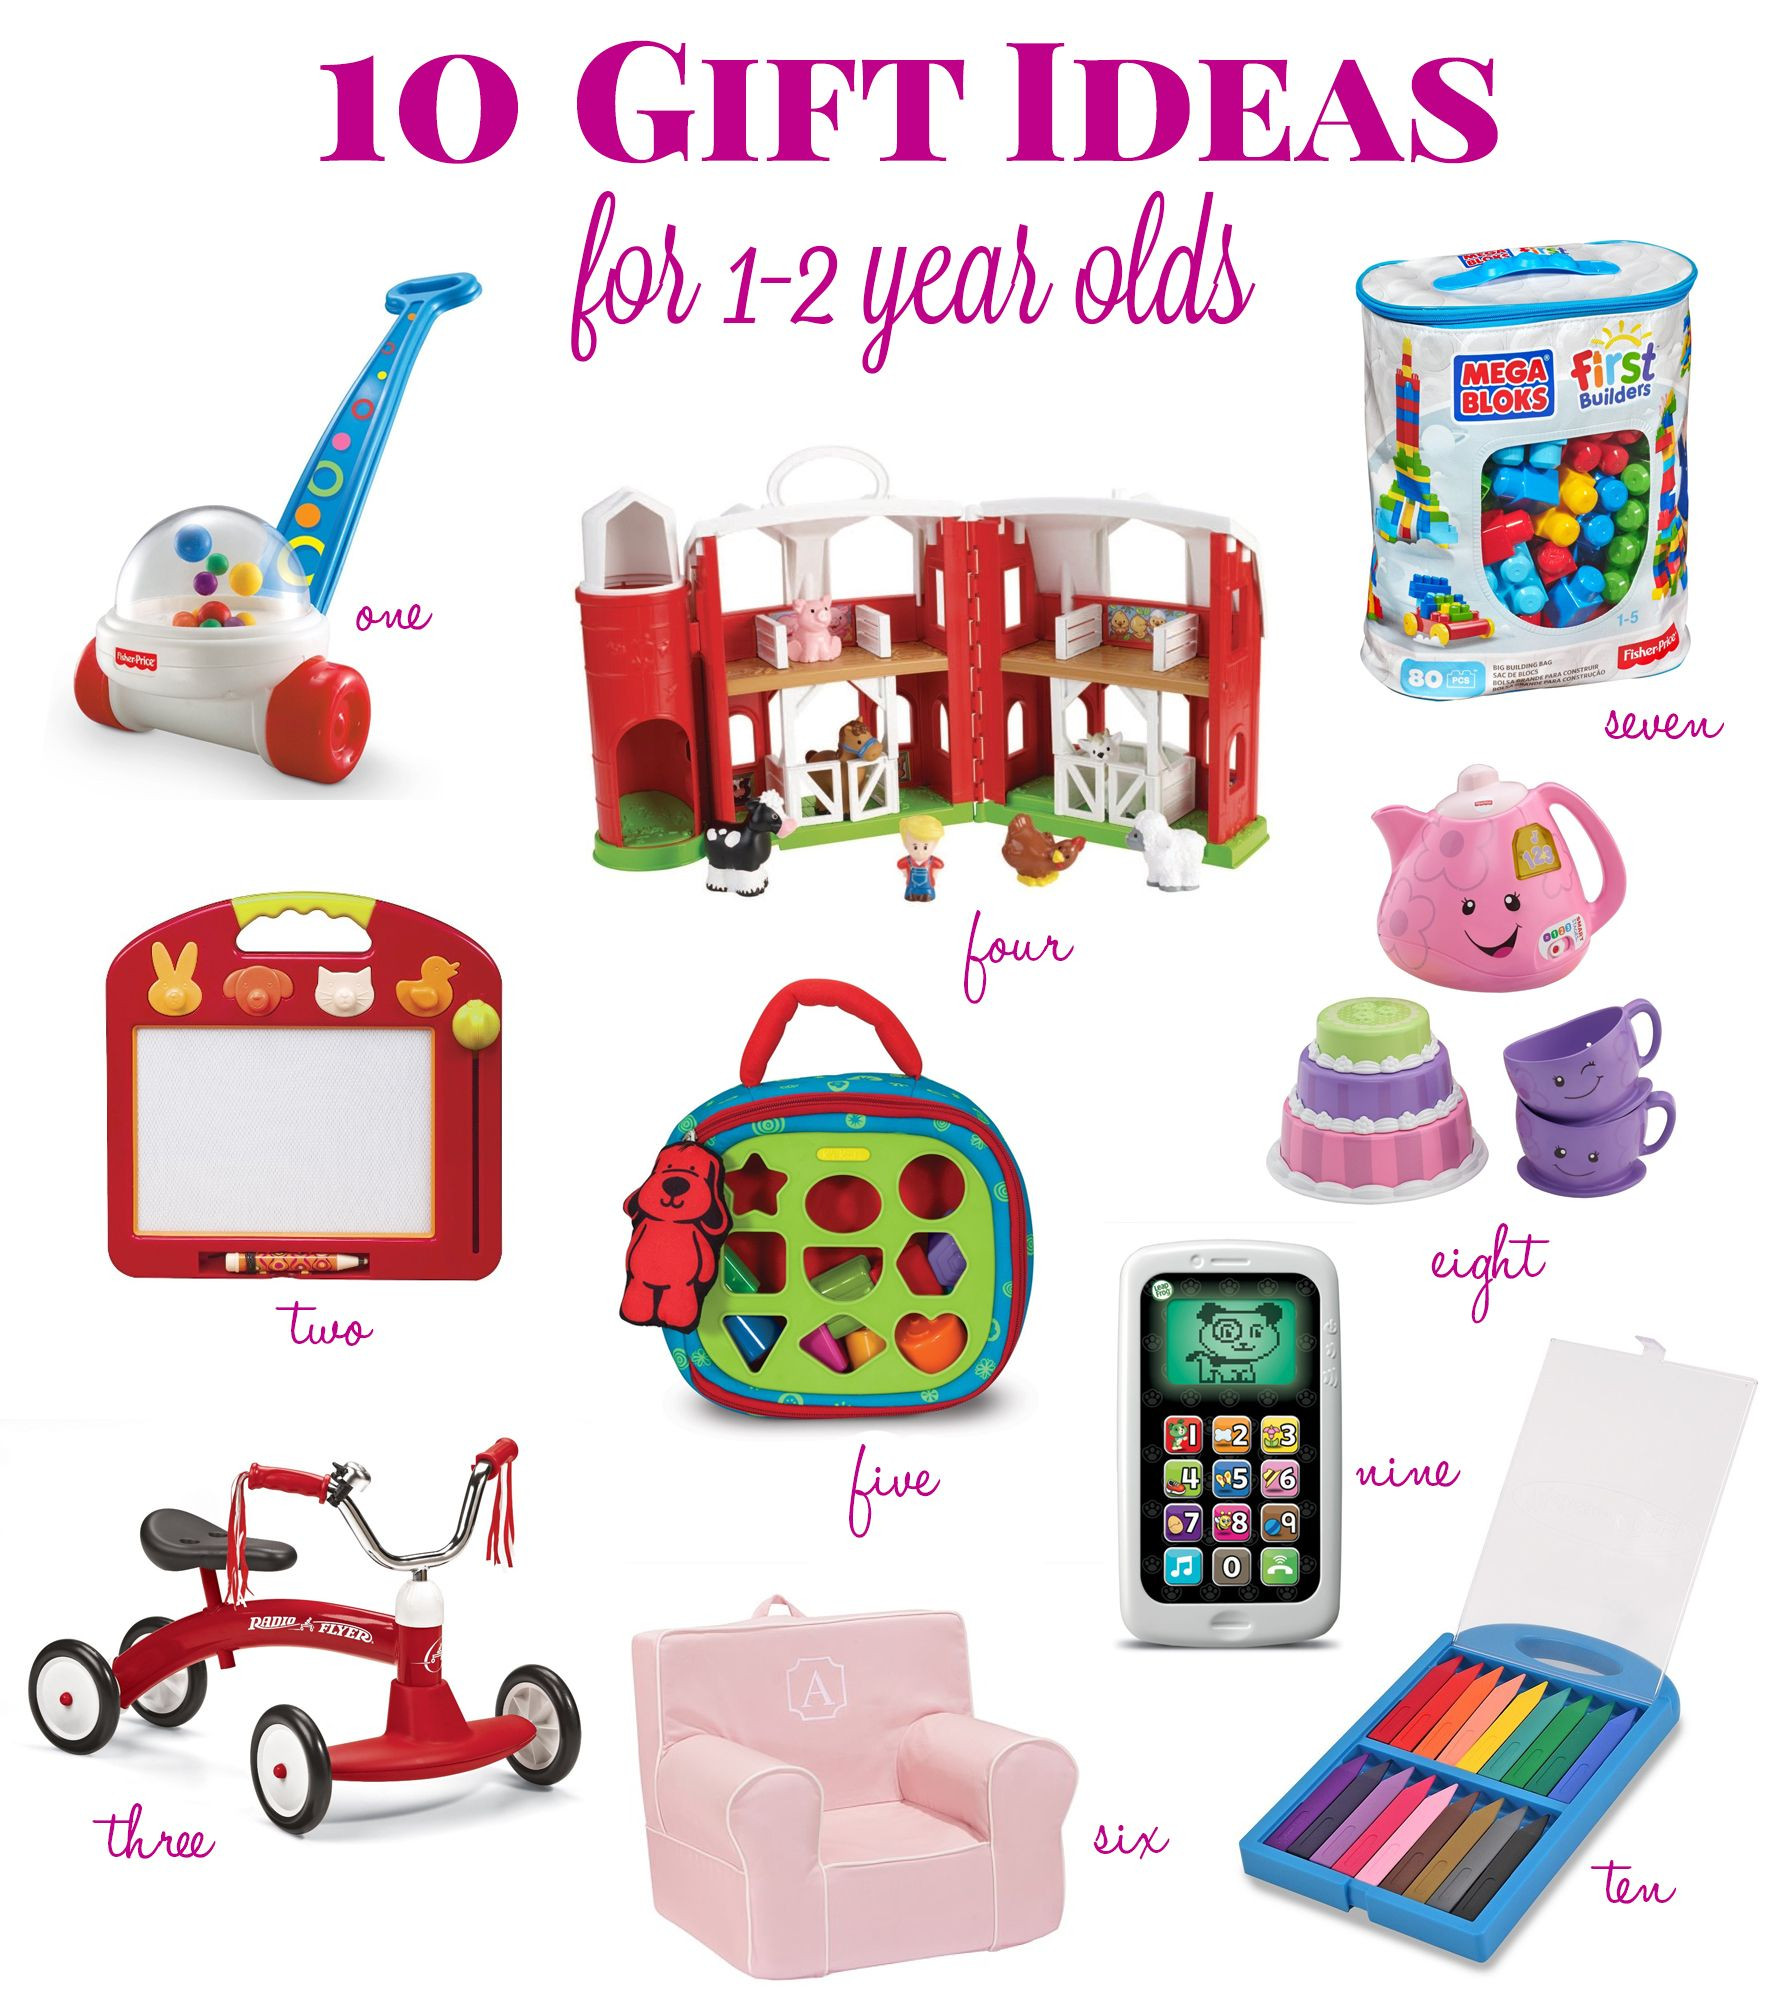 Birthday Gift Ideas For 2 Year Old Boy
 Gift Ideas for a 1 Year Old